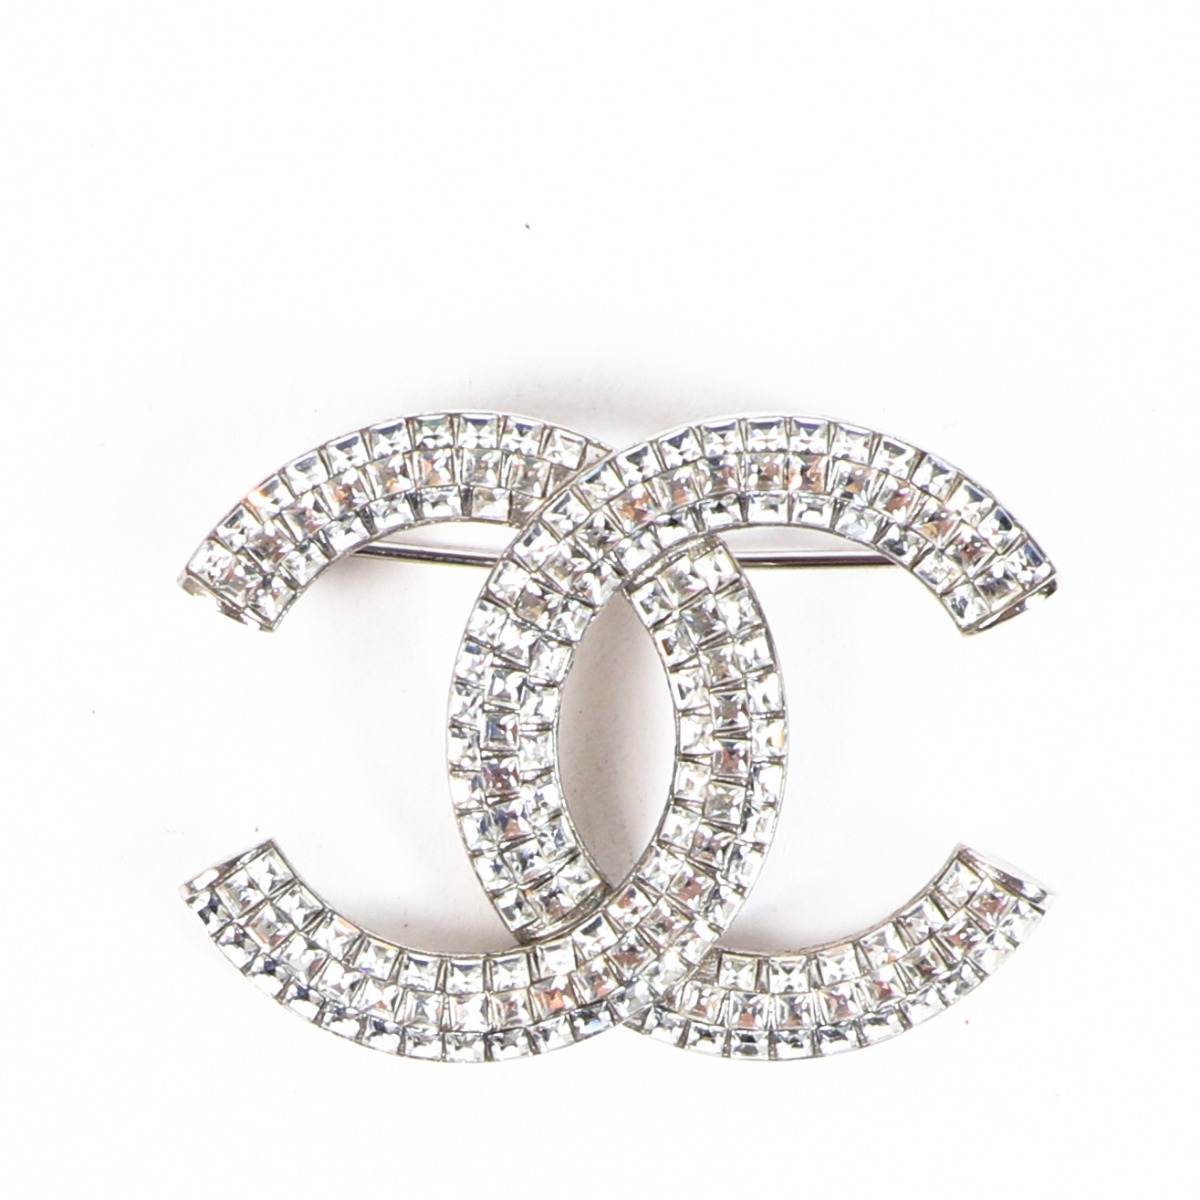 Vintage CHANEL SILVER AND CRYSTALS CC LOGO BROOCH/PIN CLASSIC